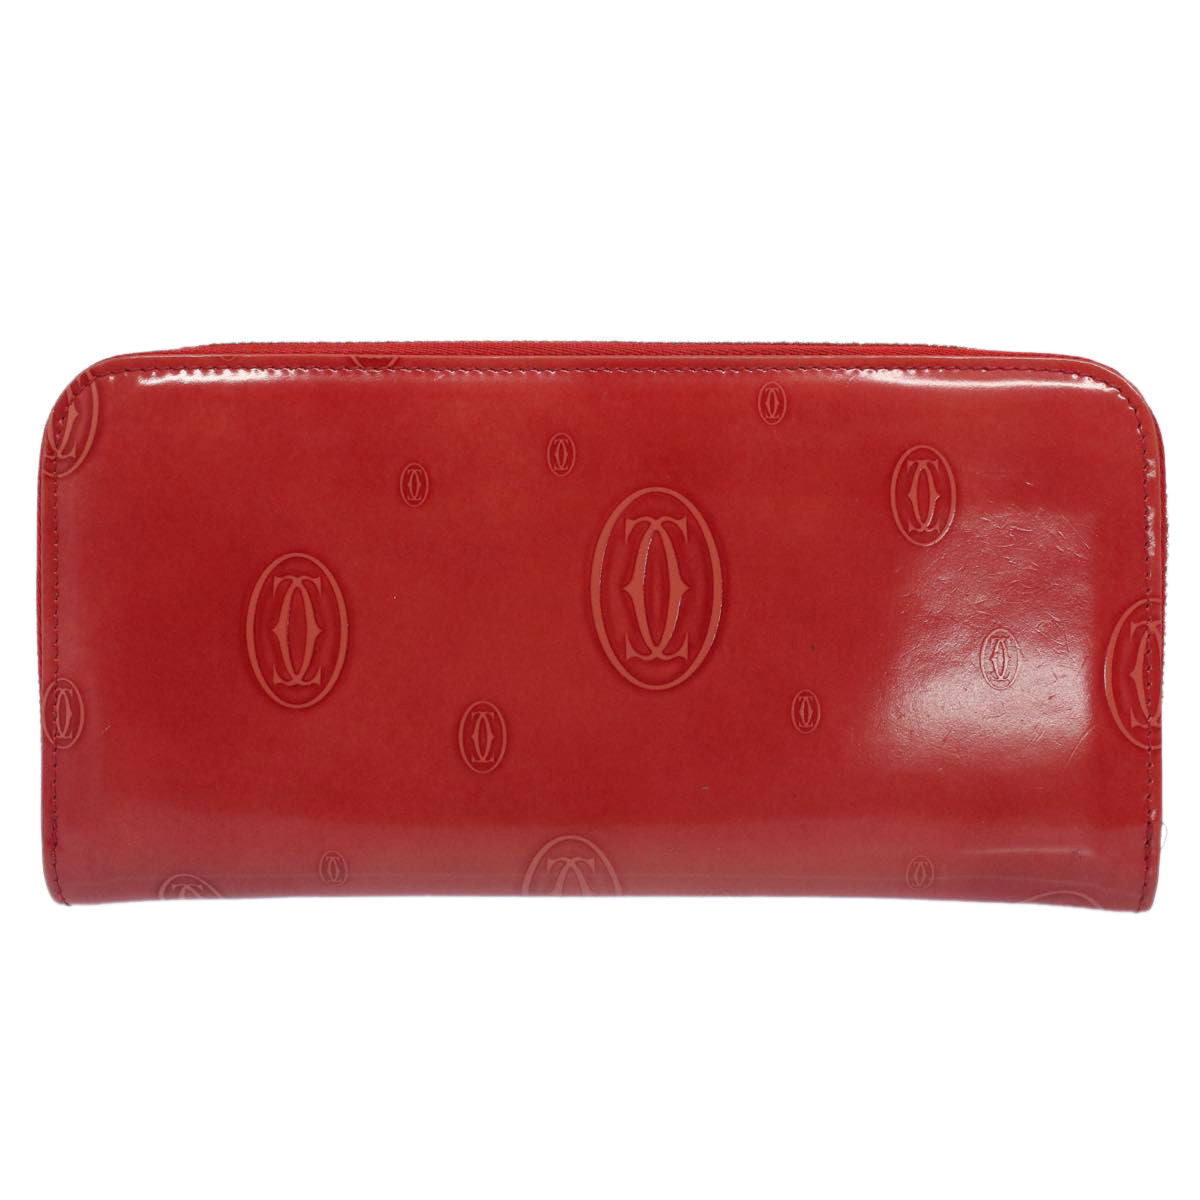 CARTIER Happy Birthday Wallet Patent leather Red Auth am4918 - 0